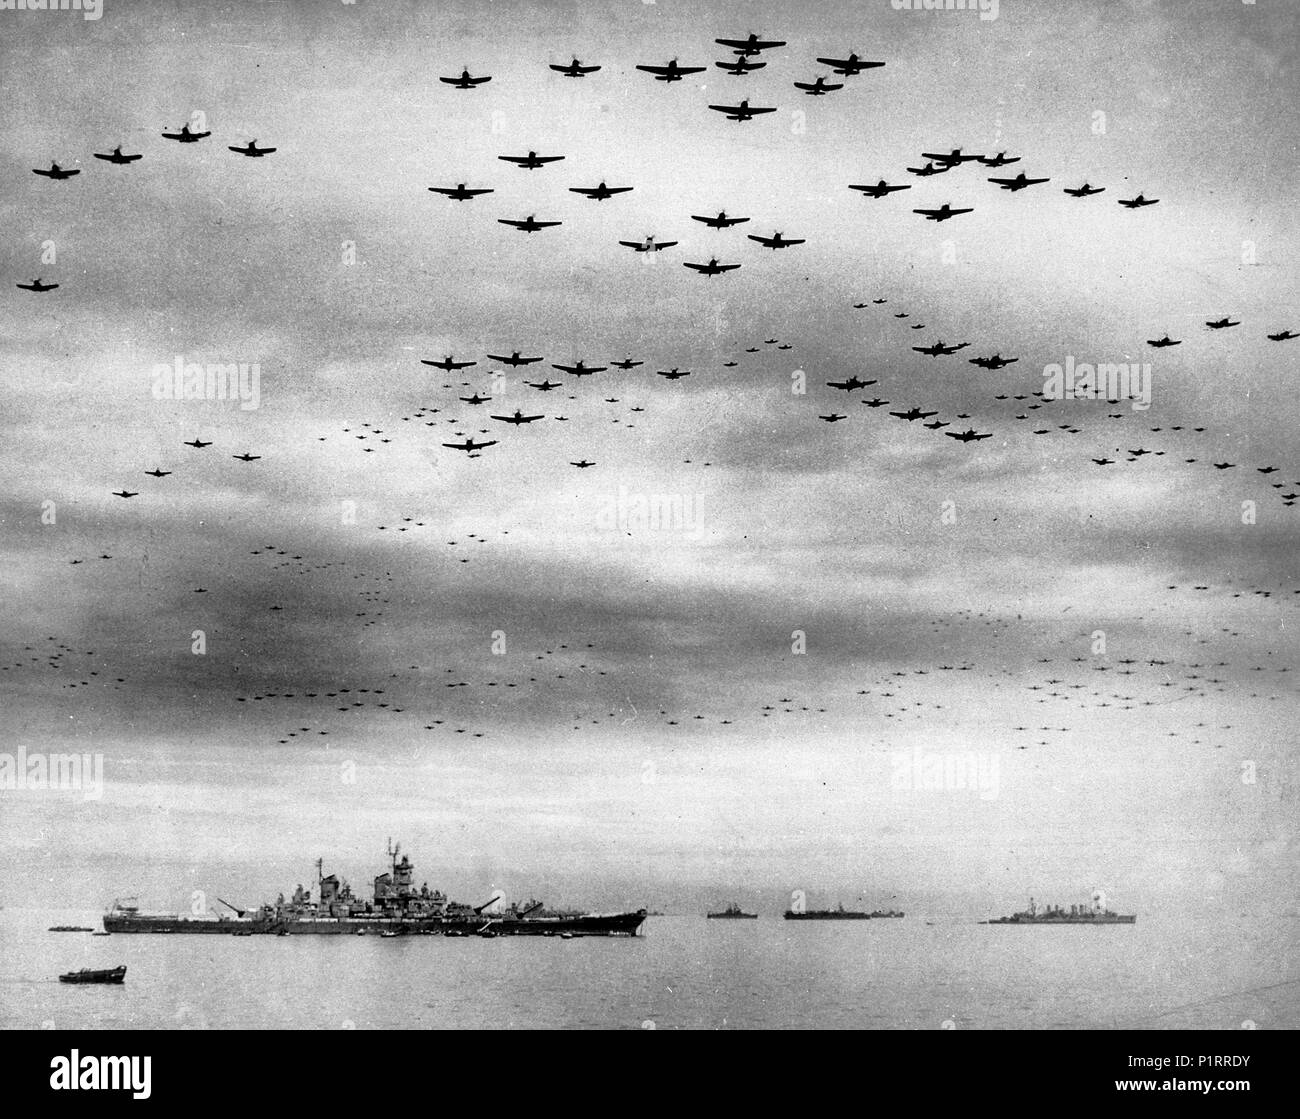 Surrender of Japan, 2 September 1945: U.S. Navy carrier planes fly in formation over the U.S. and British fleets in Tokyo Bay during surrender ceremonies. The battleship USS Missouri (BB-63), where the ceremonies took place, is at left. The light cruiser USS Detroit (CL-8) is in the right distance. Aircraft include Grumman TBM Avenger, Grumman F6F Hellcat, Curtiss SB2C Helldiver and Vought F4U Corsair types. September 2, 1945 Stock Photo